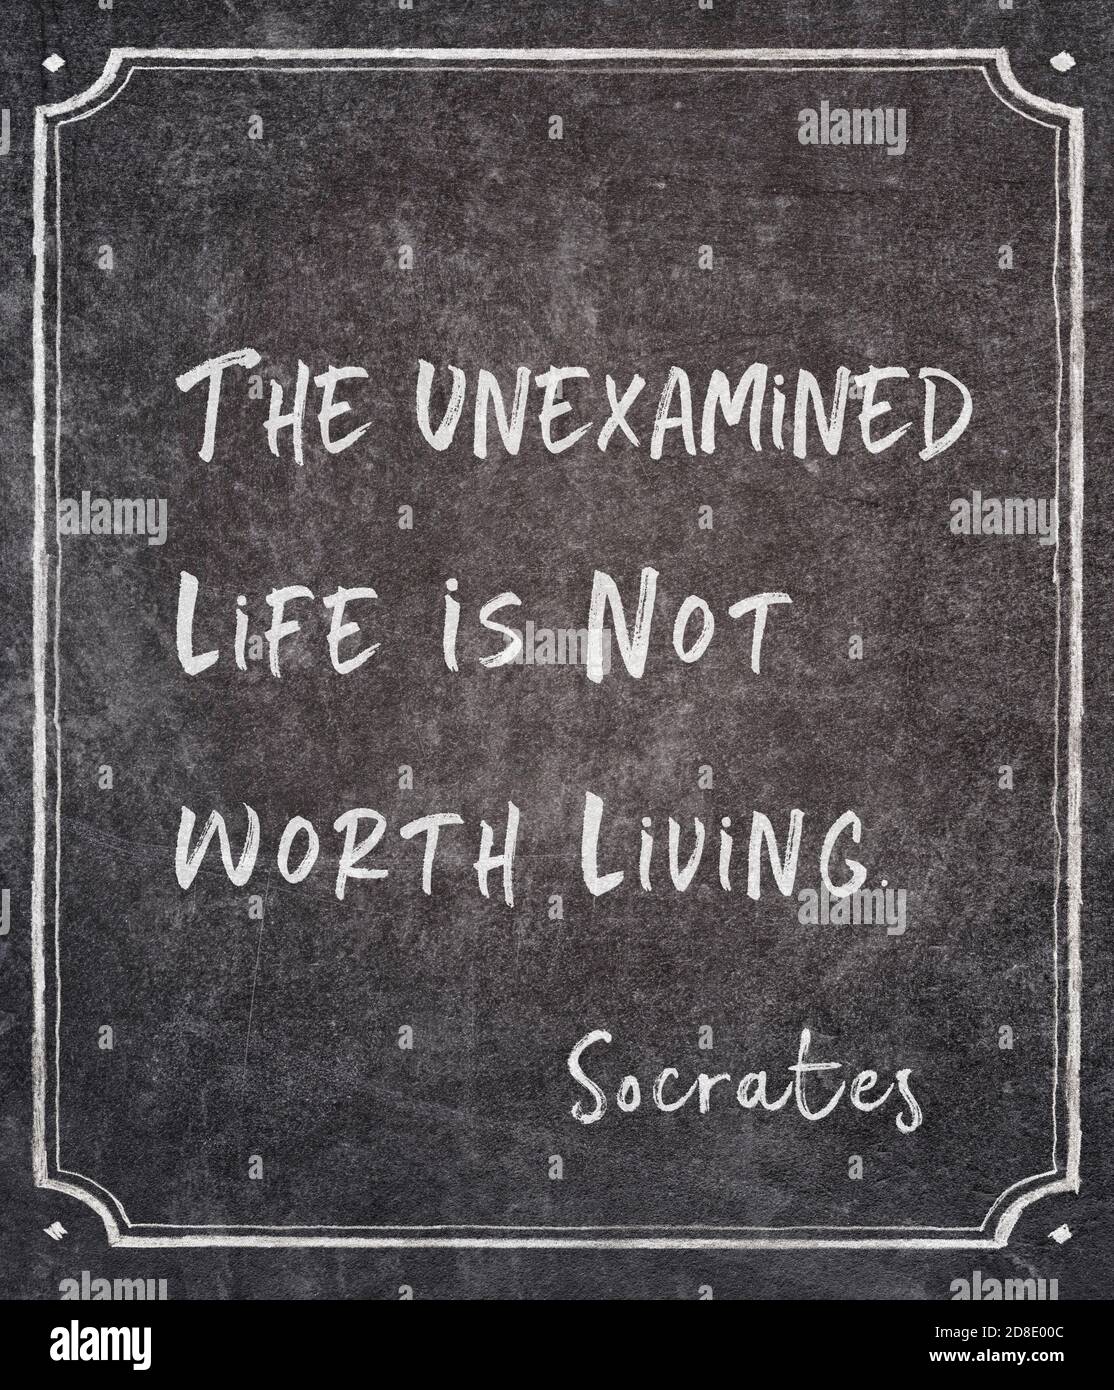 The unexamined life is not worth living - ancient Greek philosopher Socrates quote written on framed chalkboard Stock Photo